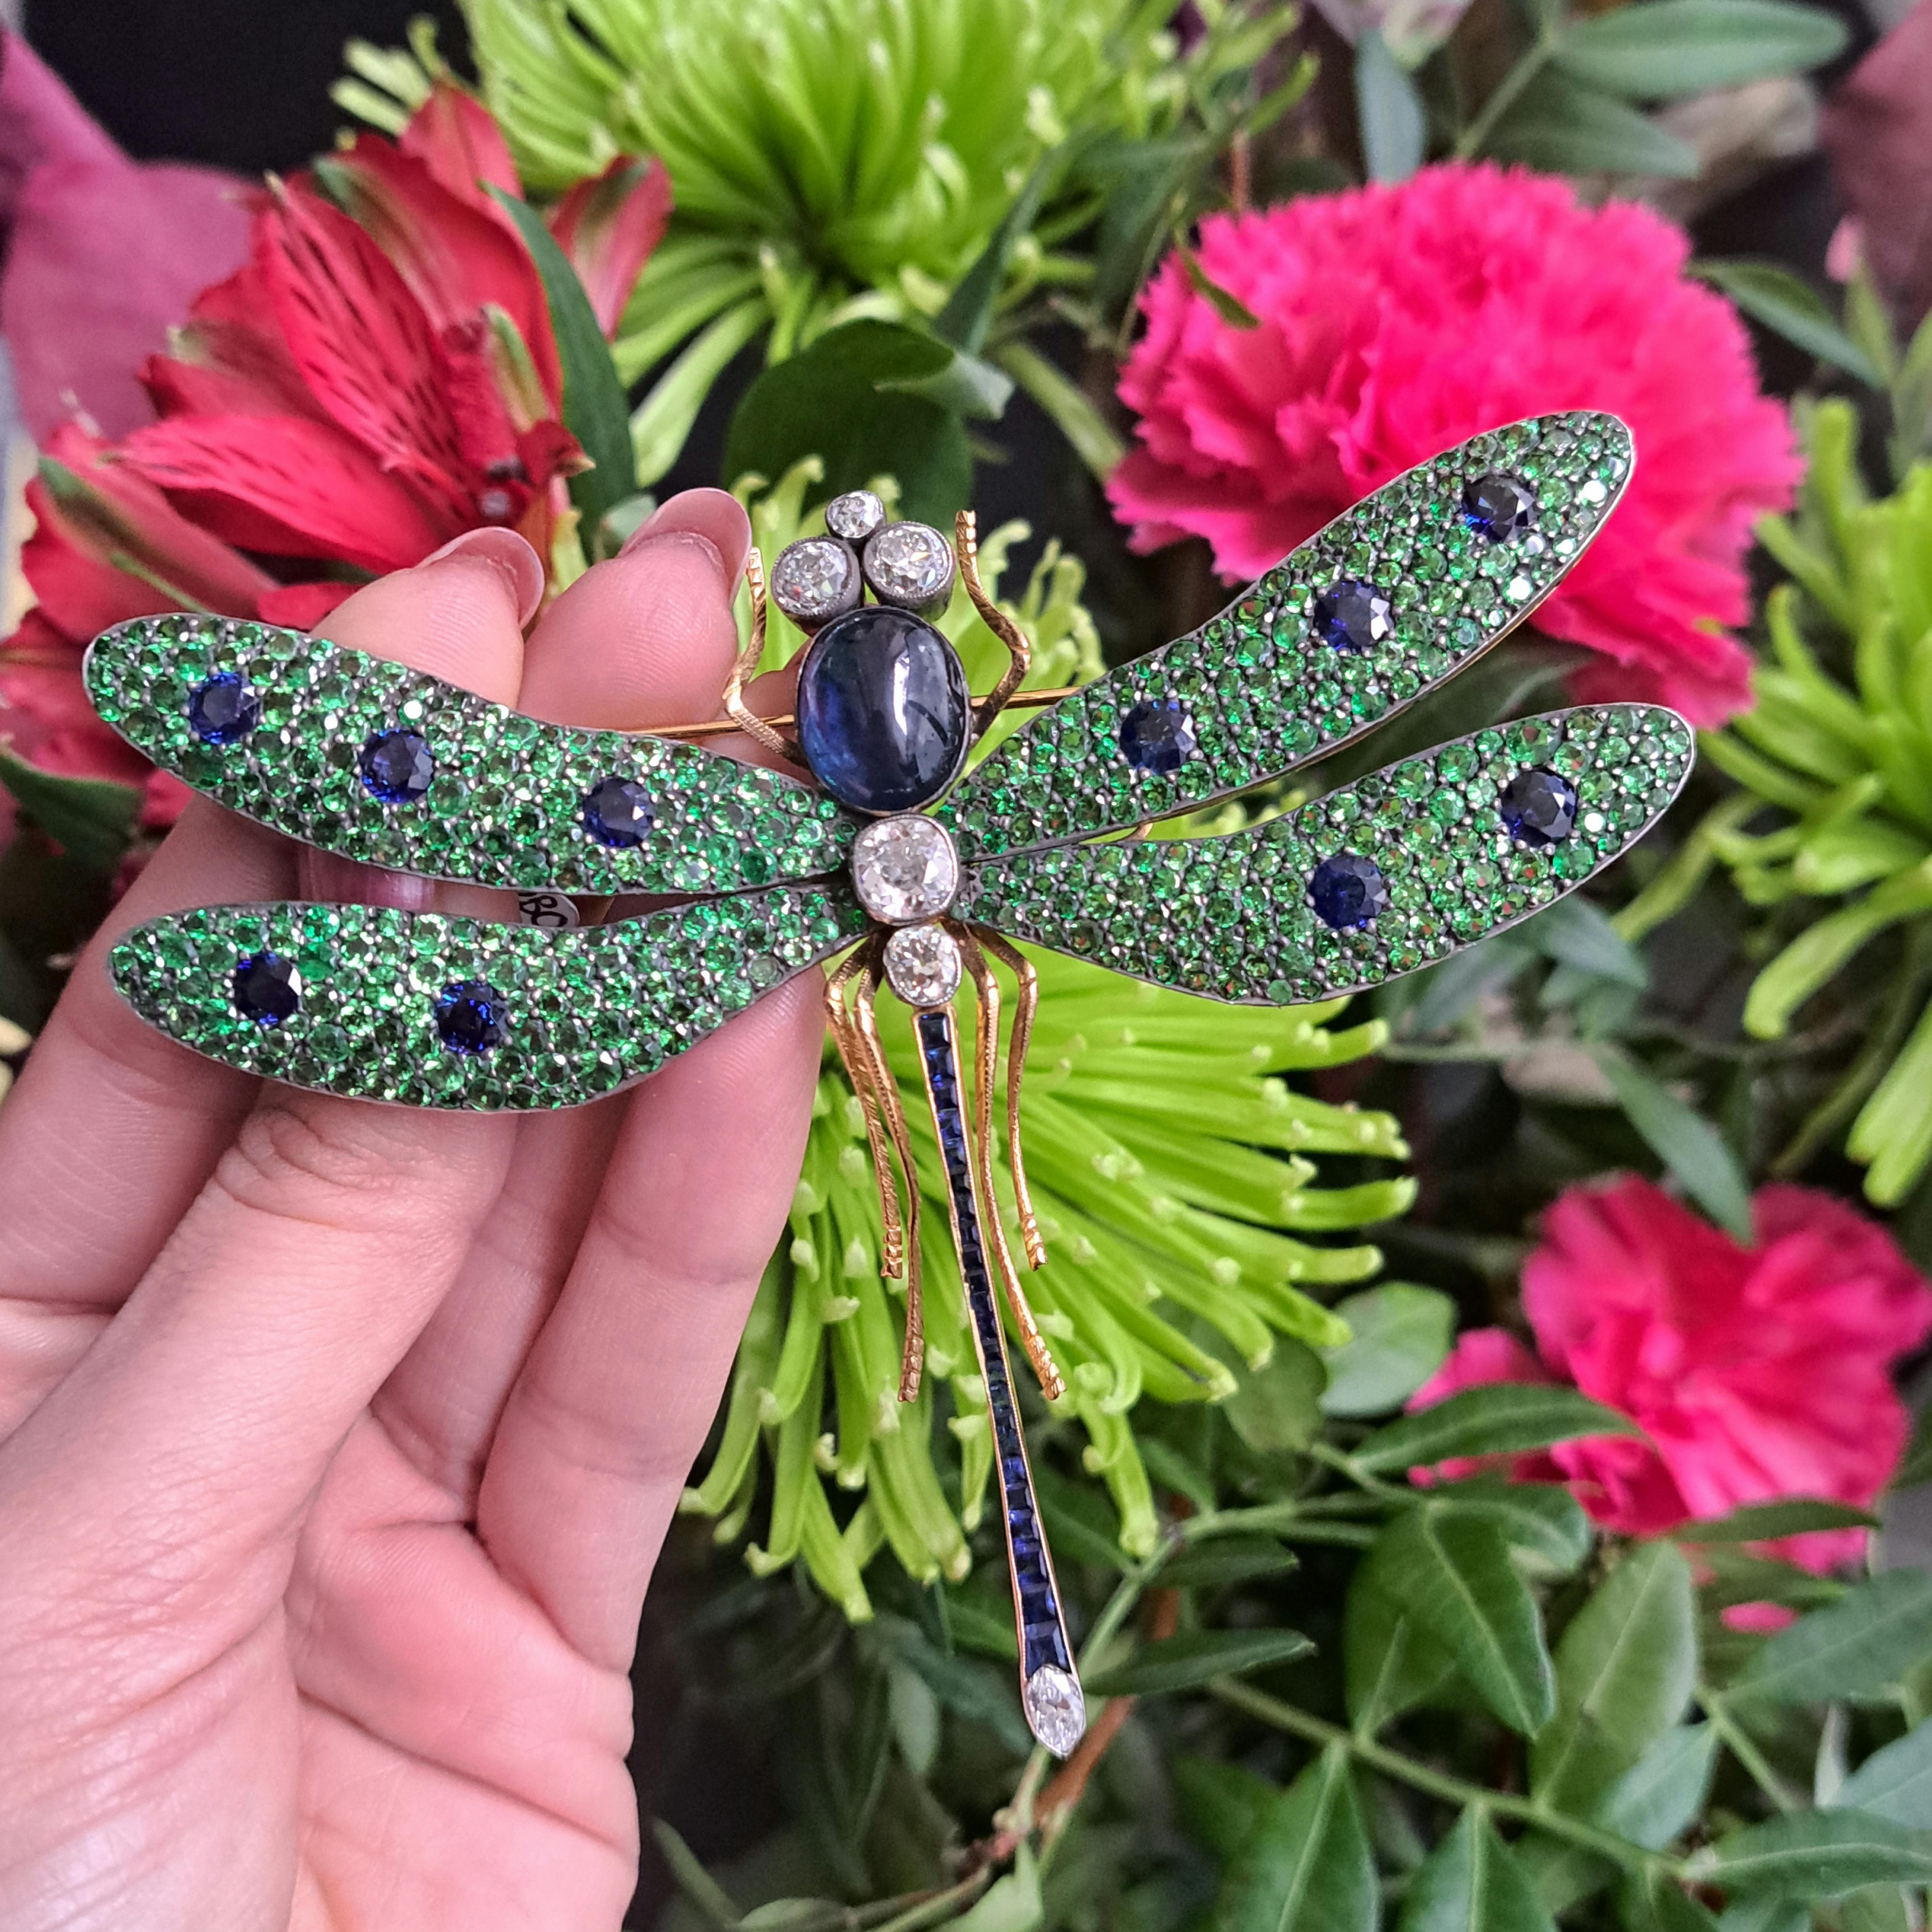 green and gold dragonfly